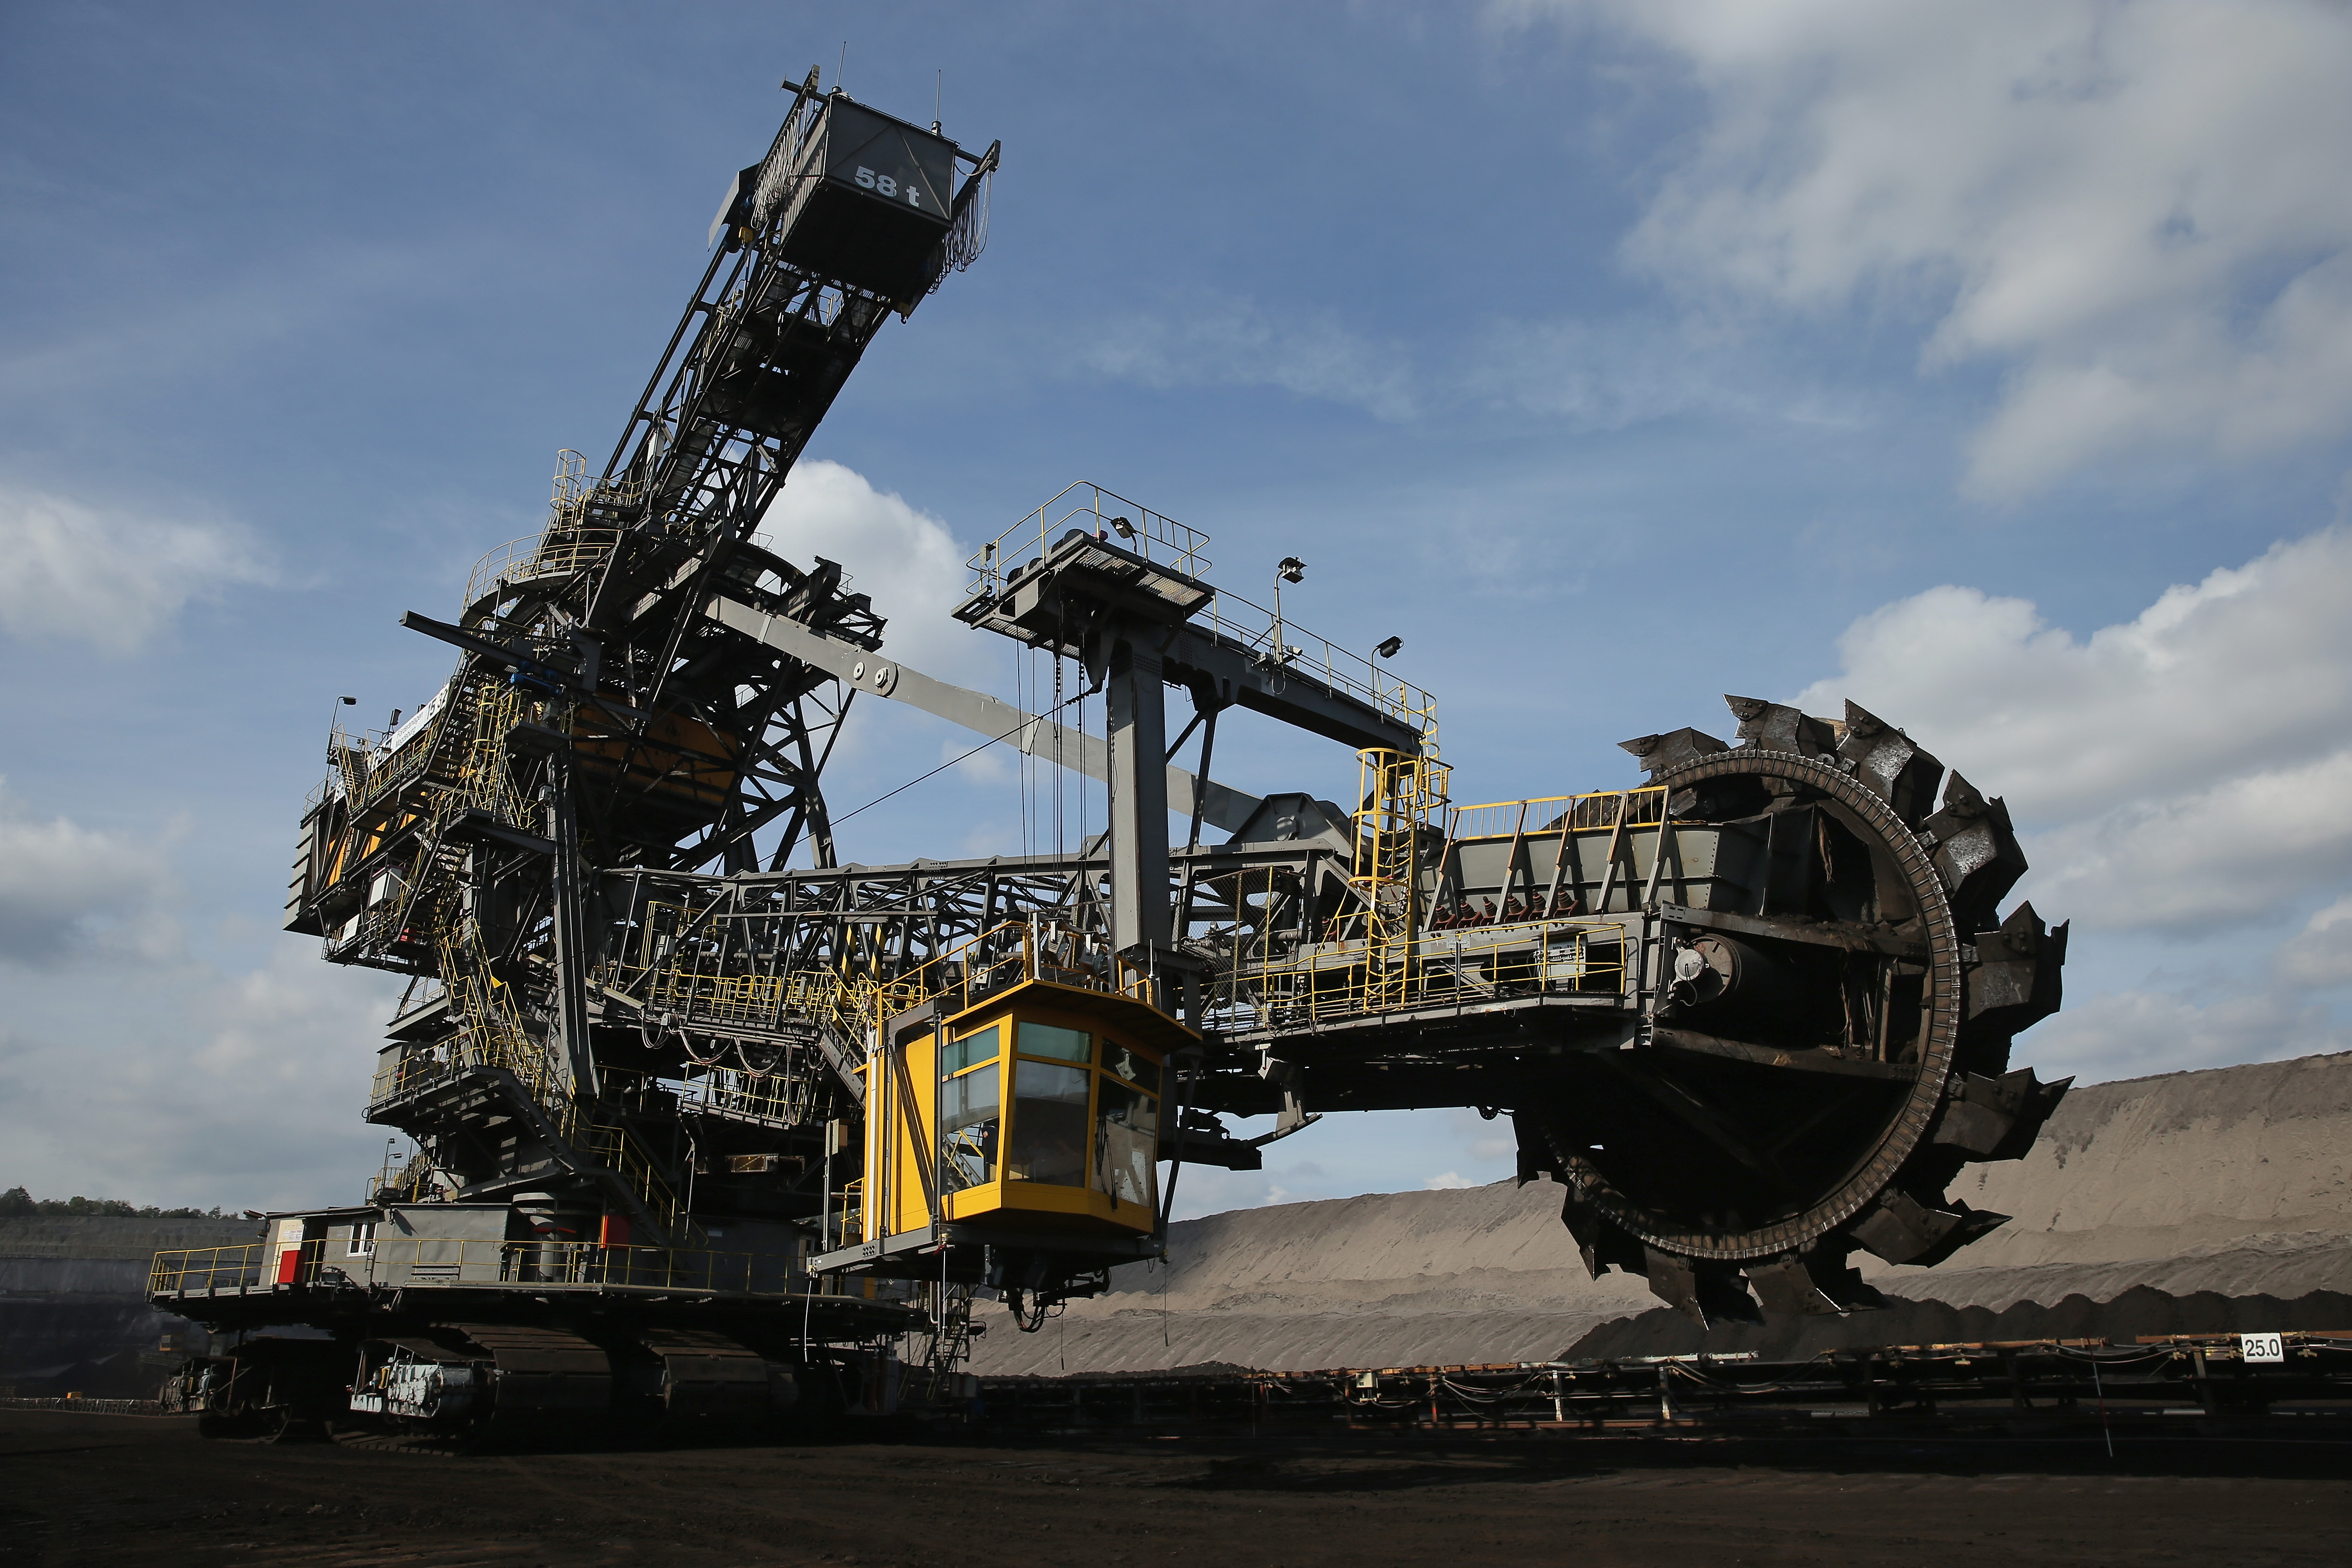 A Bucket Wheel Excavator Moves Into Position In An Open Pit Lignite Coal Mine 4k Ultra HD Wallpaper